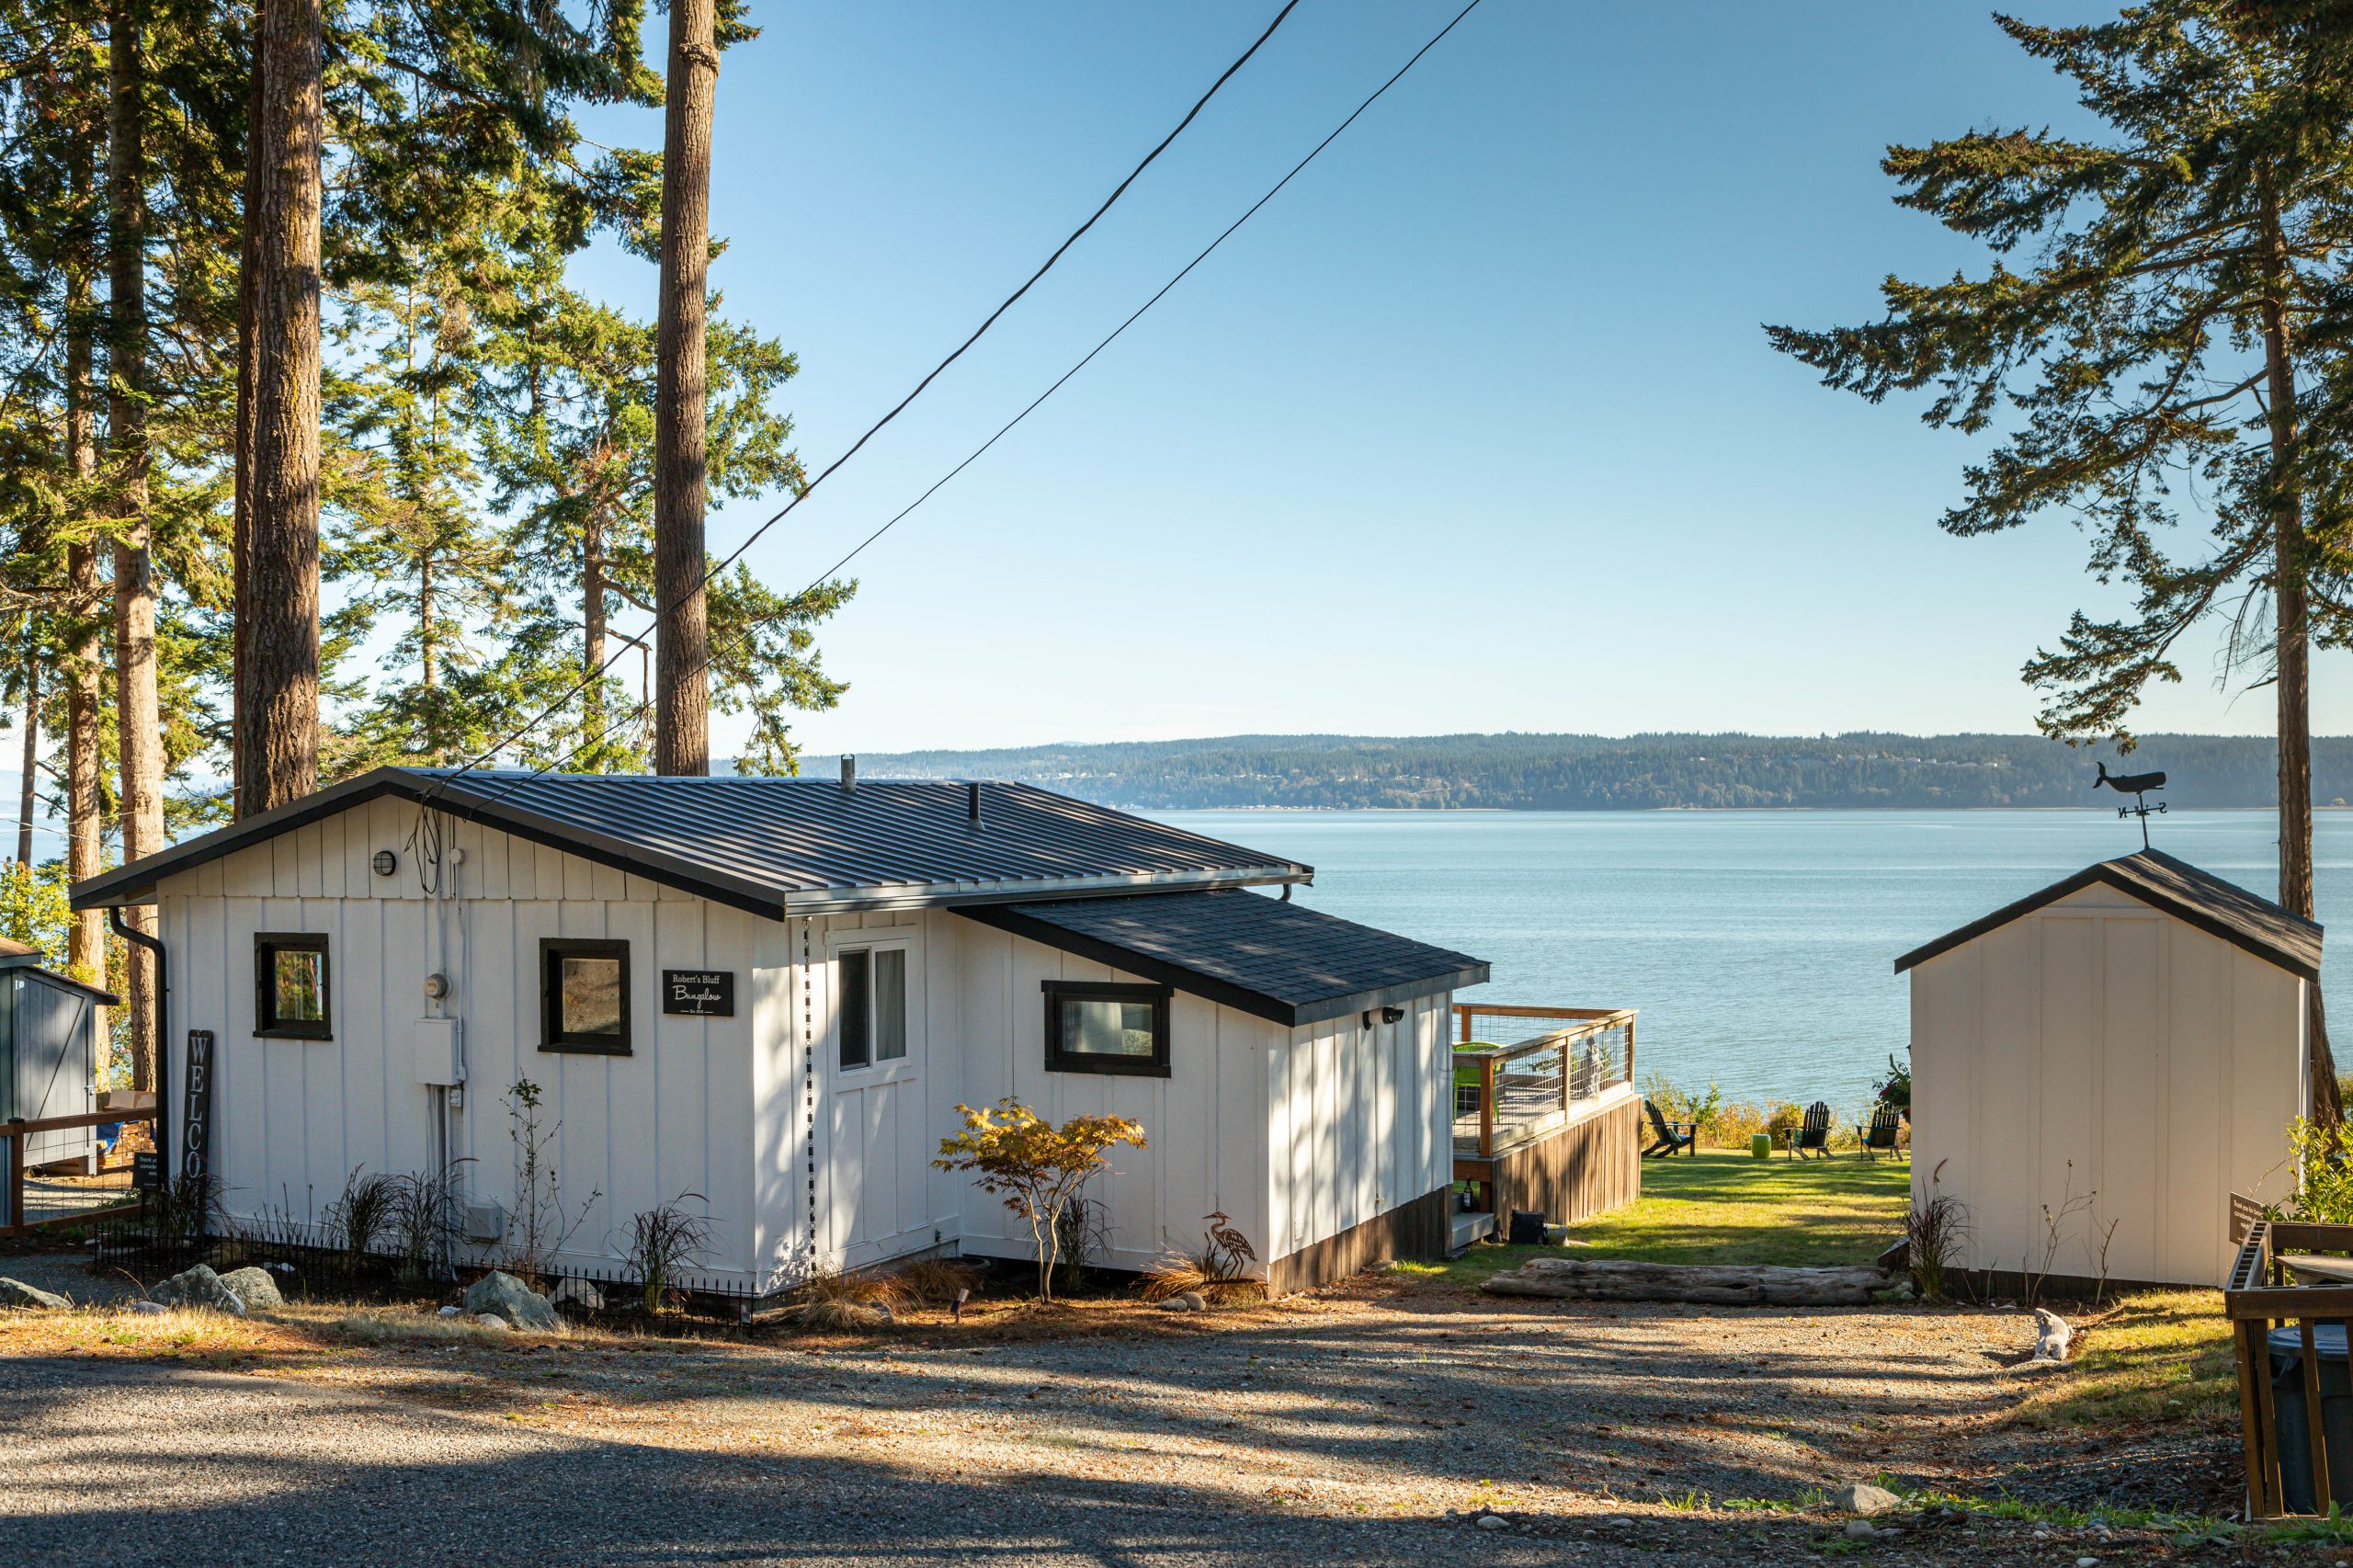 Home looking over water, Waterfront home, Whidbey Island homes, Windermere Whidbey Island, Homes on Whidbey, Whidbey real Estate